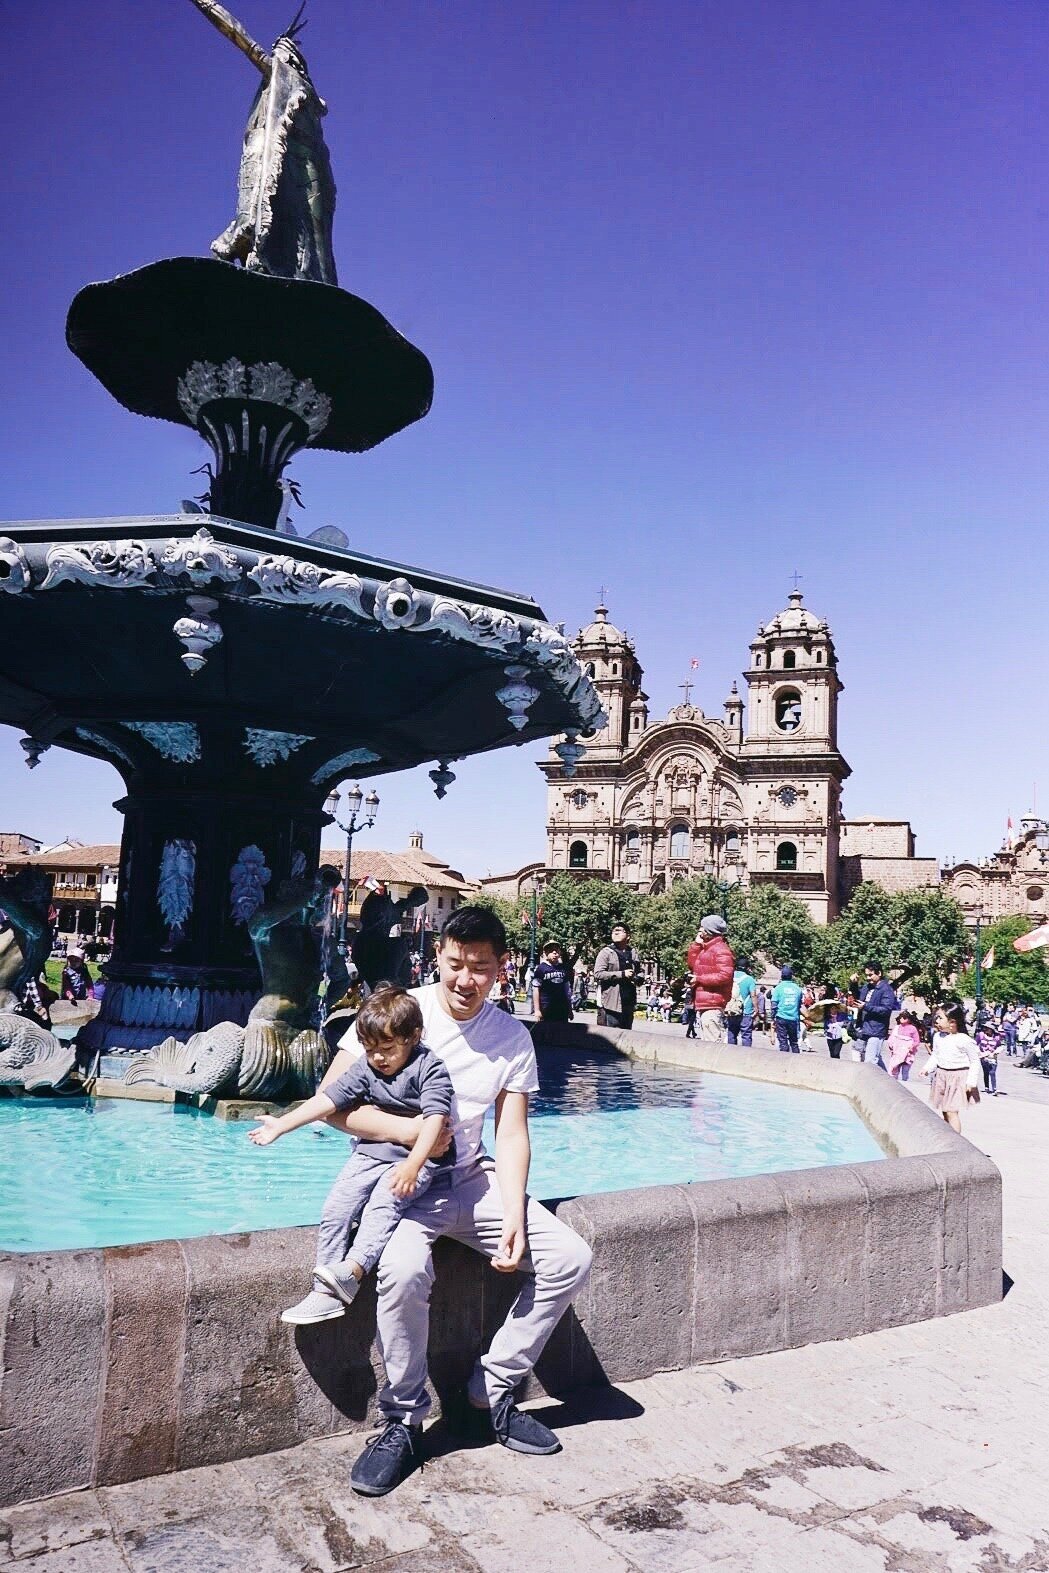  Elden (2.5 years old) playing with Peruvian toddlers in the water fountain in Plaza de Armas 